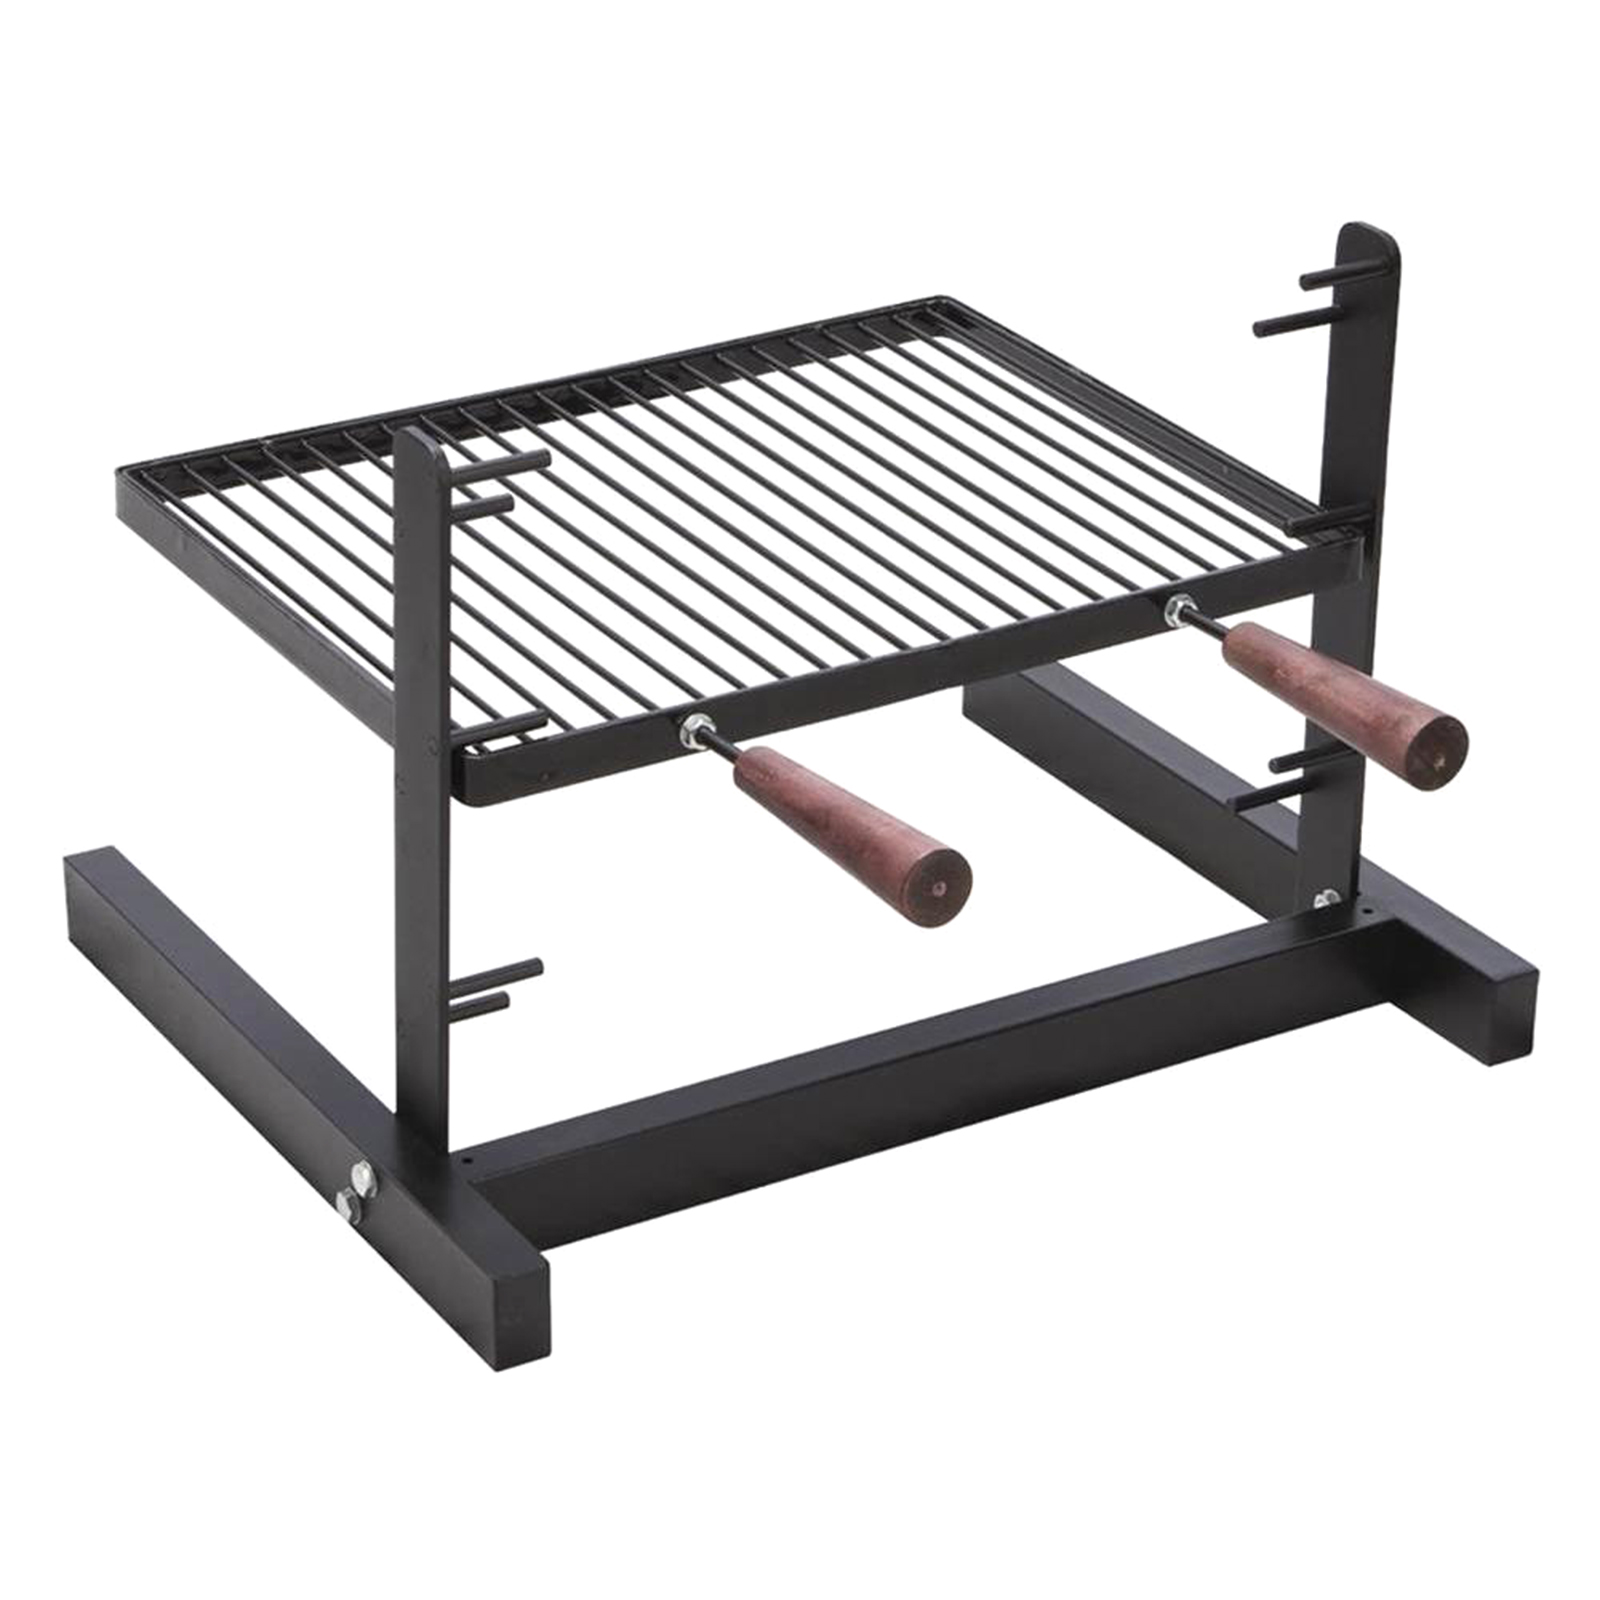 Rome Adjustable Cooking Grate for Grilling in Fireplace Hearth